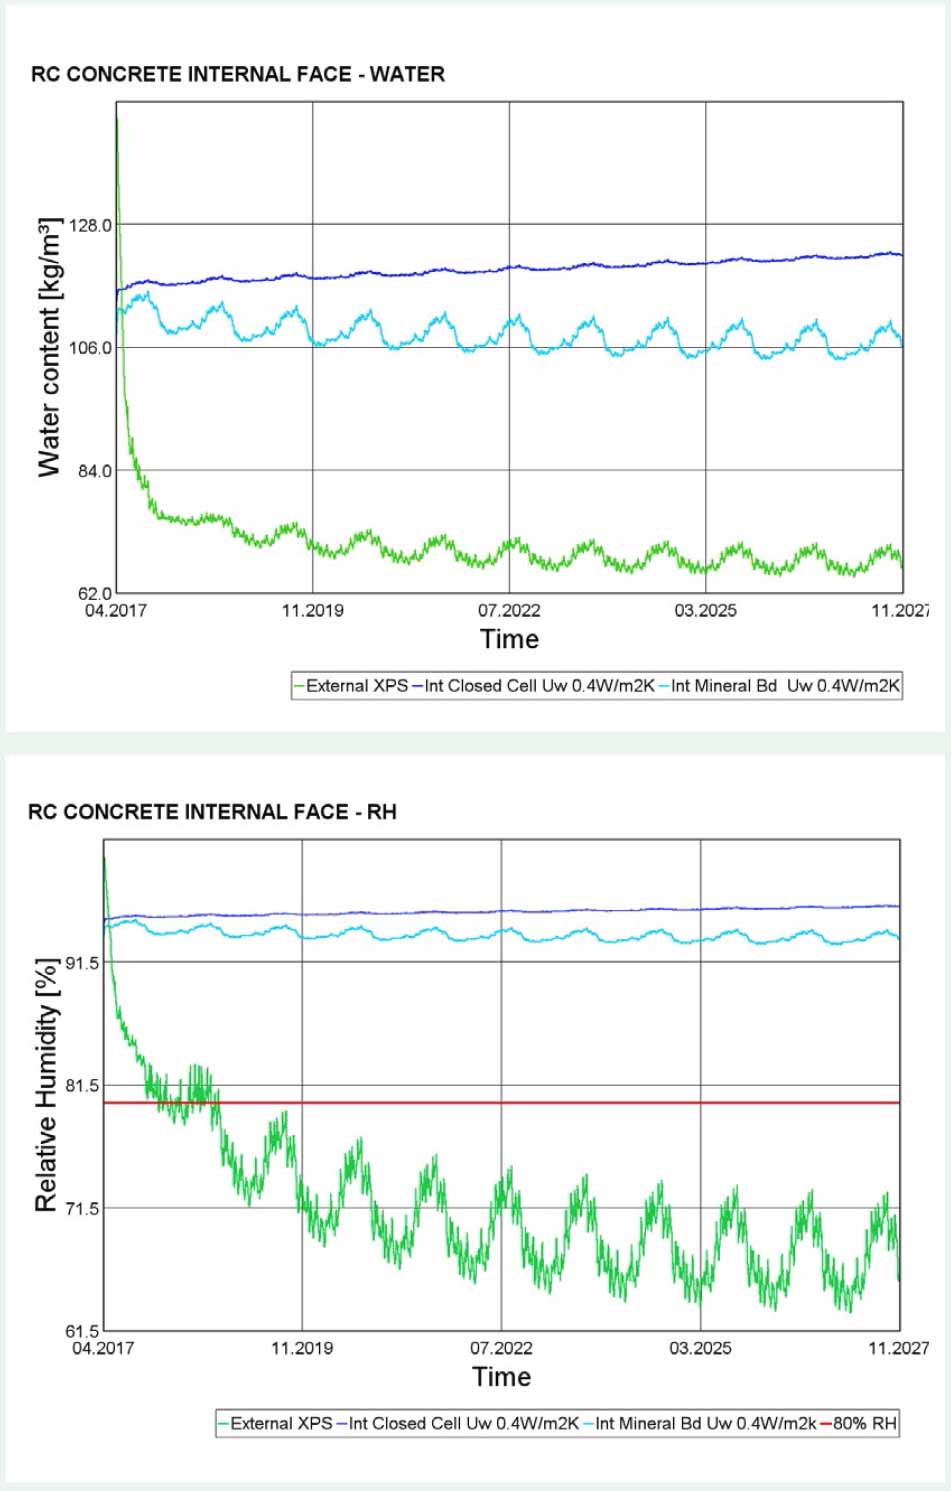 Graphs generated by Wain Morehead Associates using the WufiPro dynamic hygrothermal simulation tool calculate the potential consequences in terms of relative humidity and water content at the internal face of a reinforced concrete basement wall, using different approaches to insulation. Relatively humidity and water content both end up significantly lower with the external XPS (green) than the internal closed cell (purple) or internal mineral (blue) insulations.